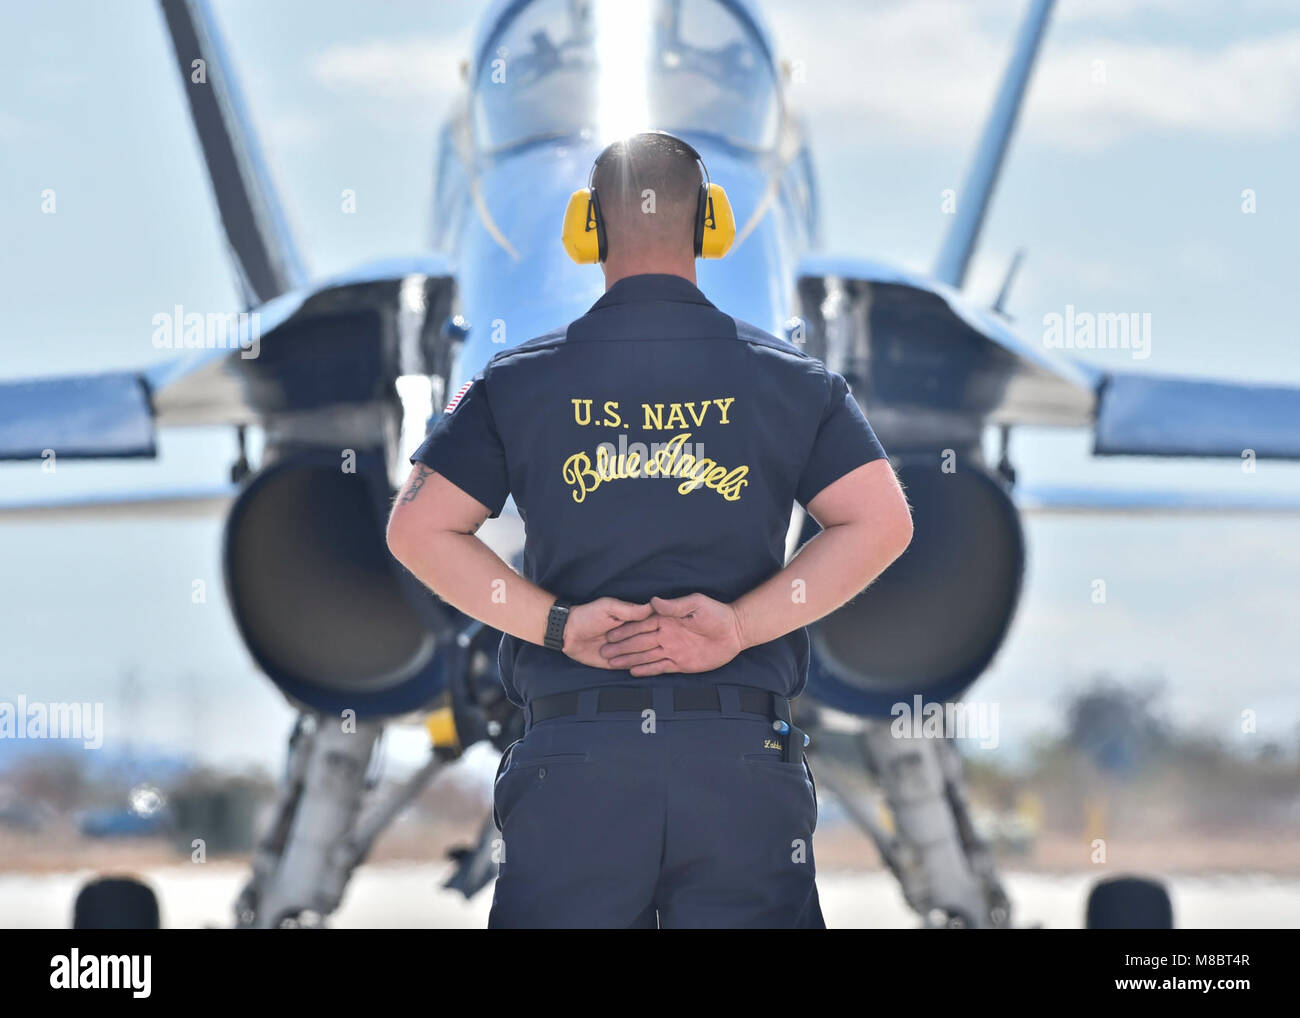 EL CENTRO, Calif. (Feb. 22, 2018) Blue Angel Crew Chief, Aviation Ordnanceman 2nd Class, Josh Labbe, prepares to launch Lt. Damon Kroes, for a pratice demonstration. The Blue Angels are scheduled to perform more than 60 demonstrations at more than 30 locations across the U.S. in 2018. (U.S. Navy Stock Photo